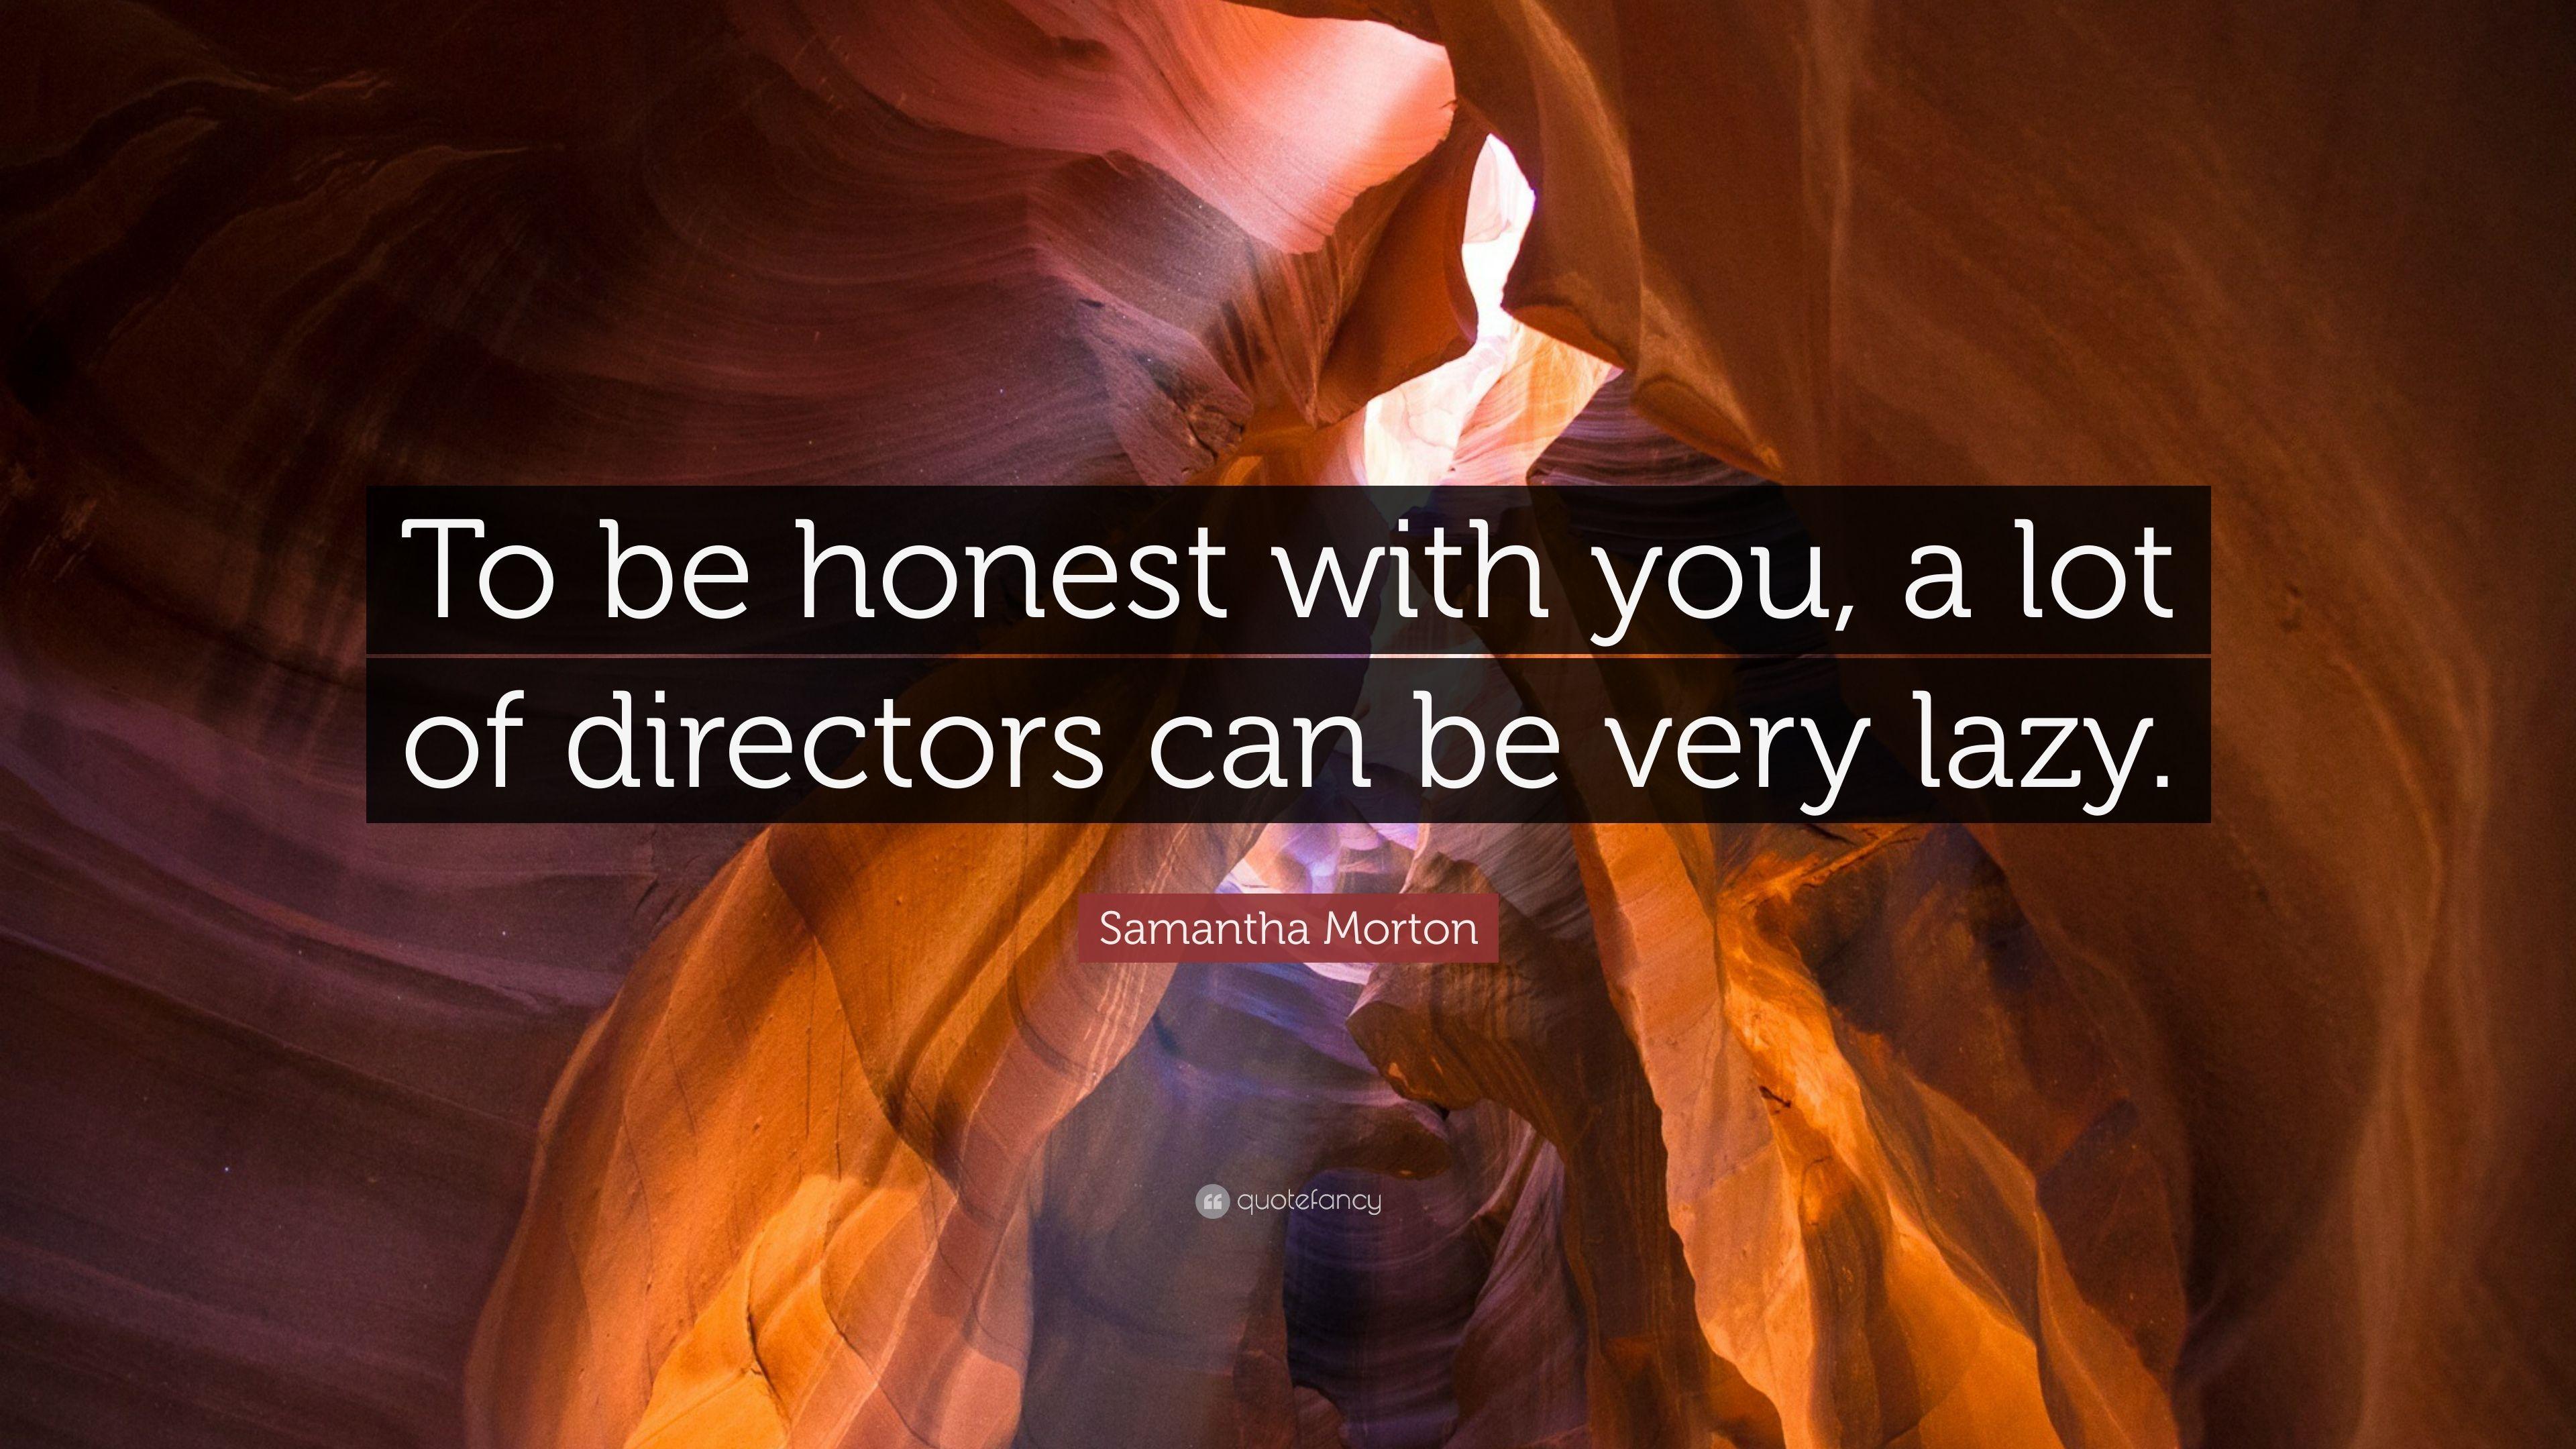 Samantha Morton Quote: “To be honest with you, a lot of directors